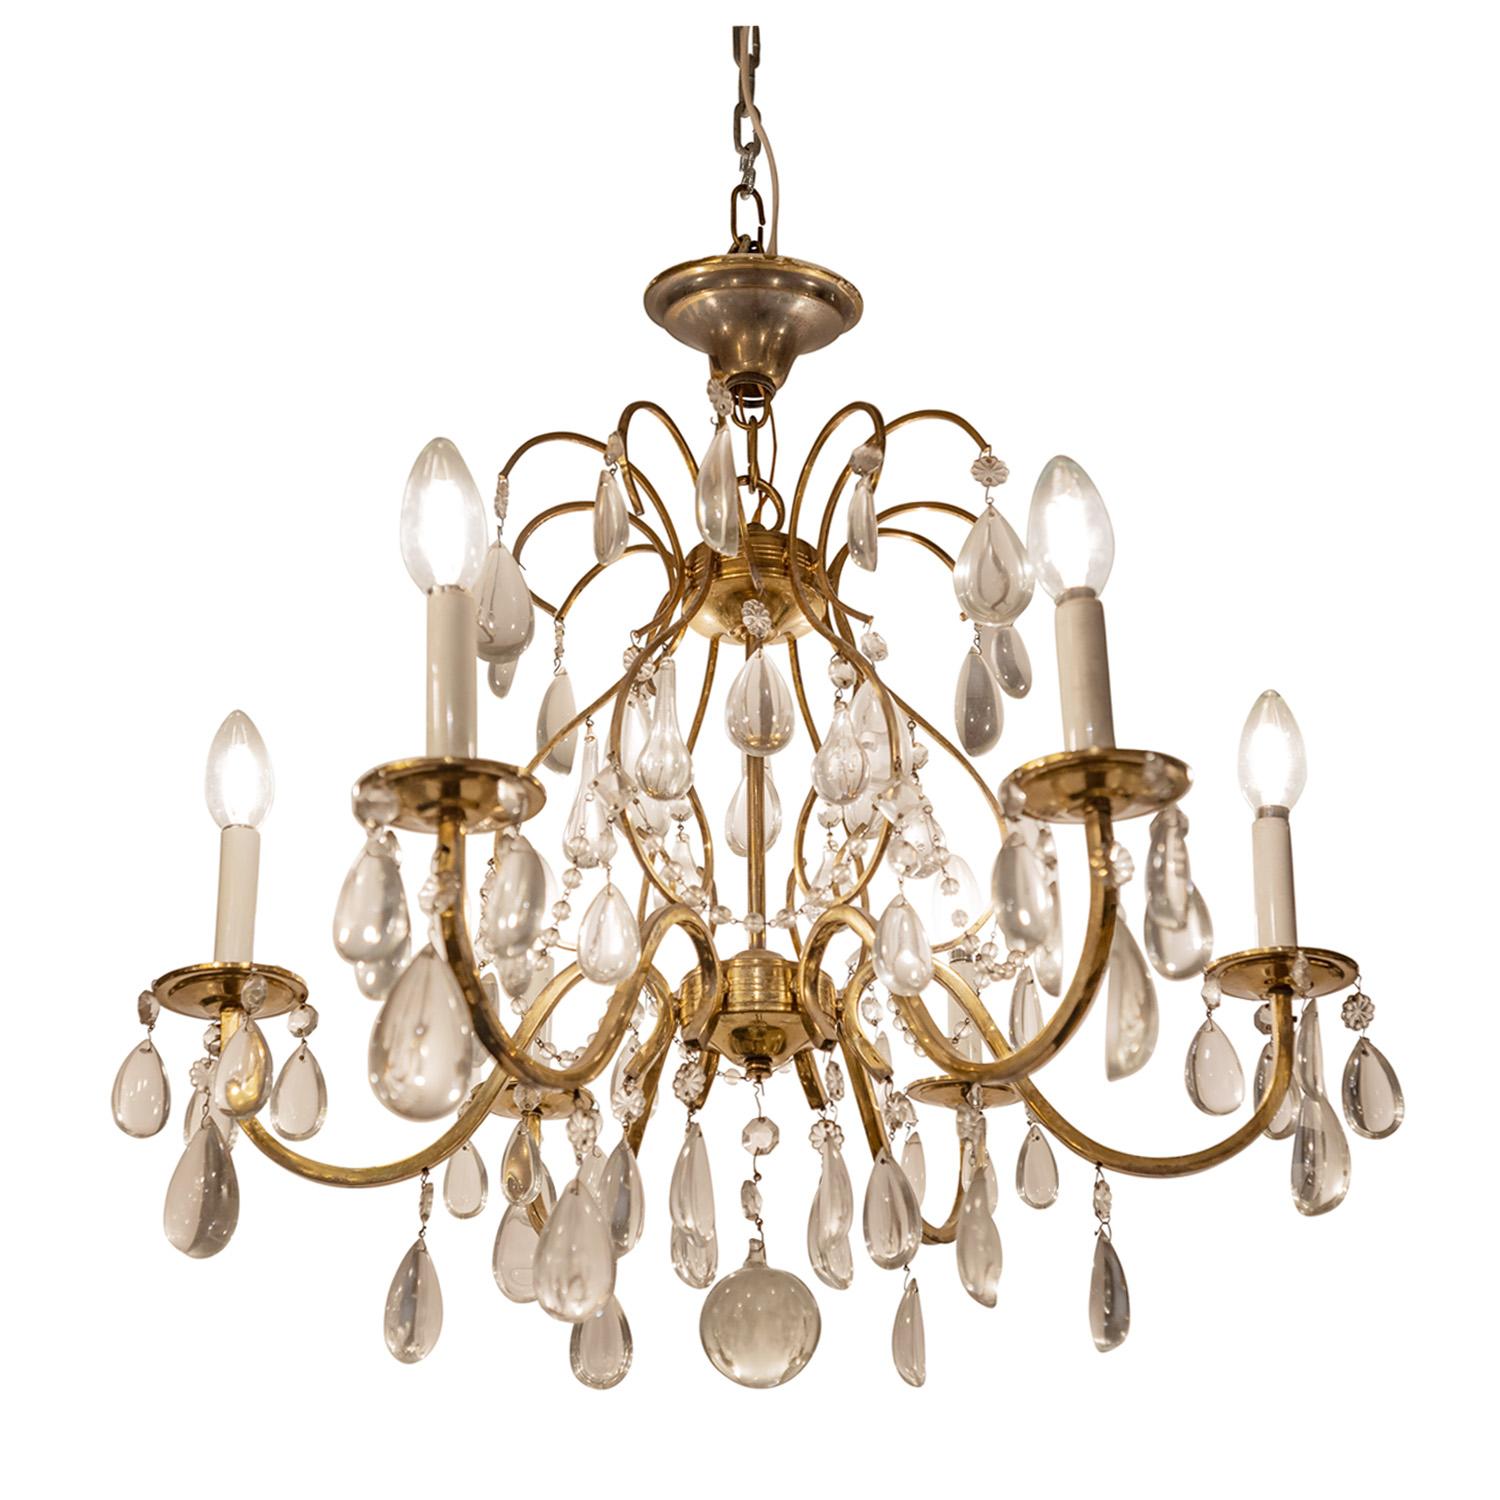 Elegant chandelier in brass with teardrop crystals and petite faceted crystals, French 1950's. This chandelier is very chic. The drop can be customized.